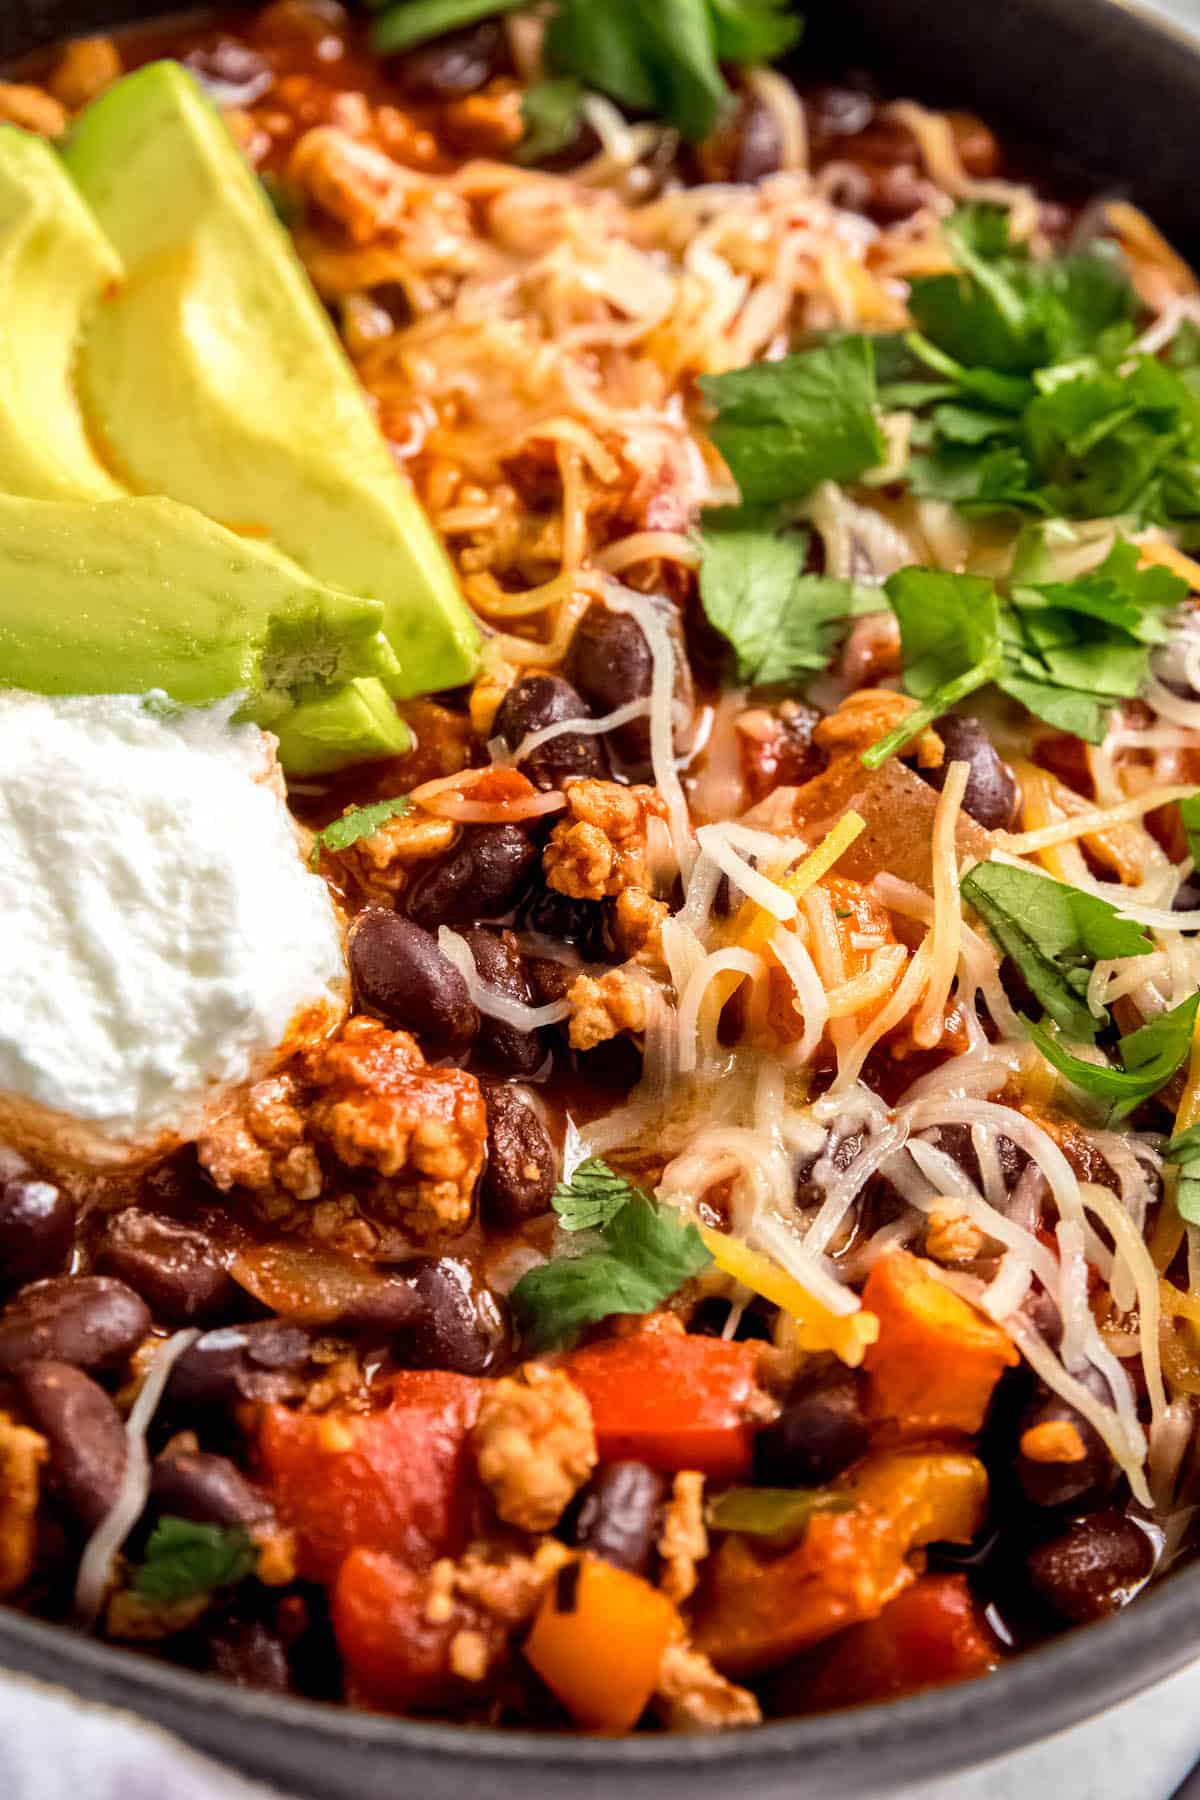 45 degree angle of a bowl of garnished black bean chicken chili topped with shredded cheddar and avocado.